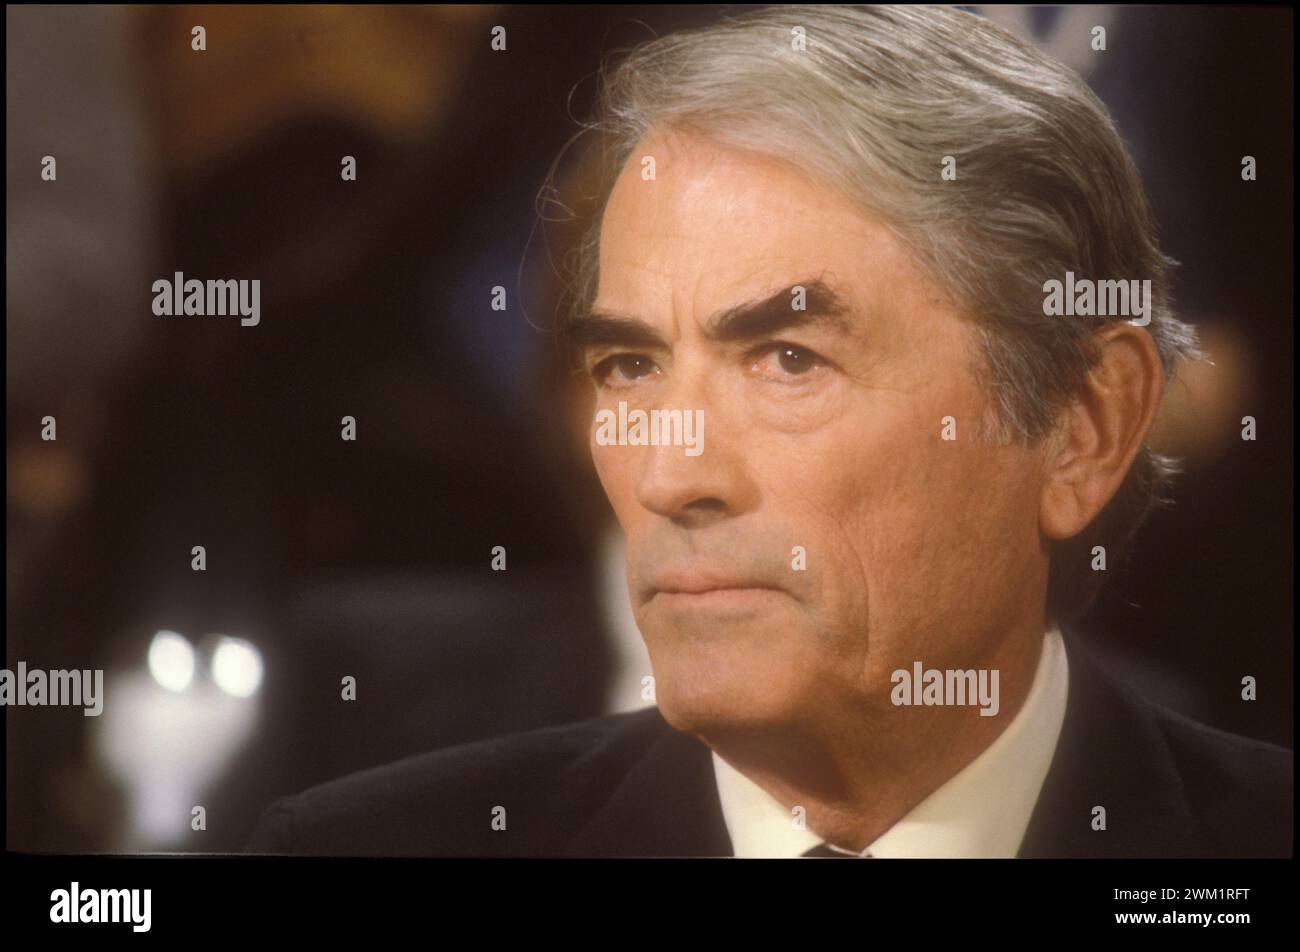 MME4713035 Actor GREGORY PECK, 1983/GREGORY PECK, attore, 1983; (add.info.: Actor GREGORY PECK, 1983/GREGORY PECK, attore, 1983); © Marcello Mencarini. All rights reserved 2024. Stock Photo